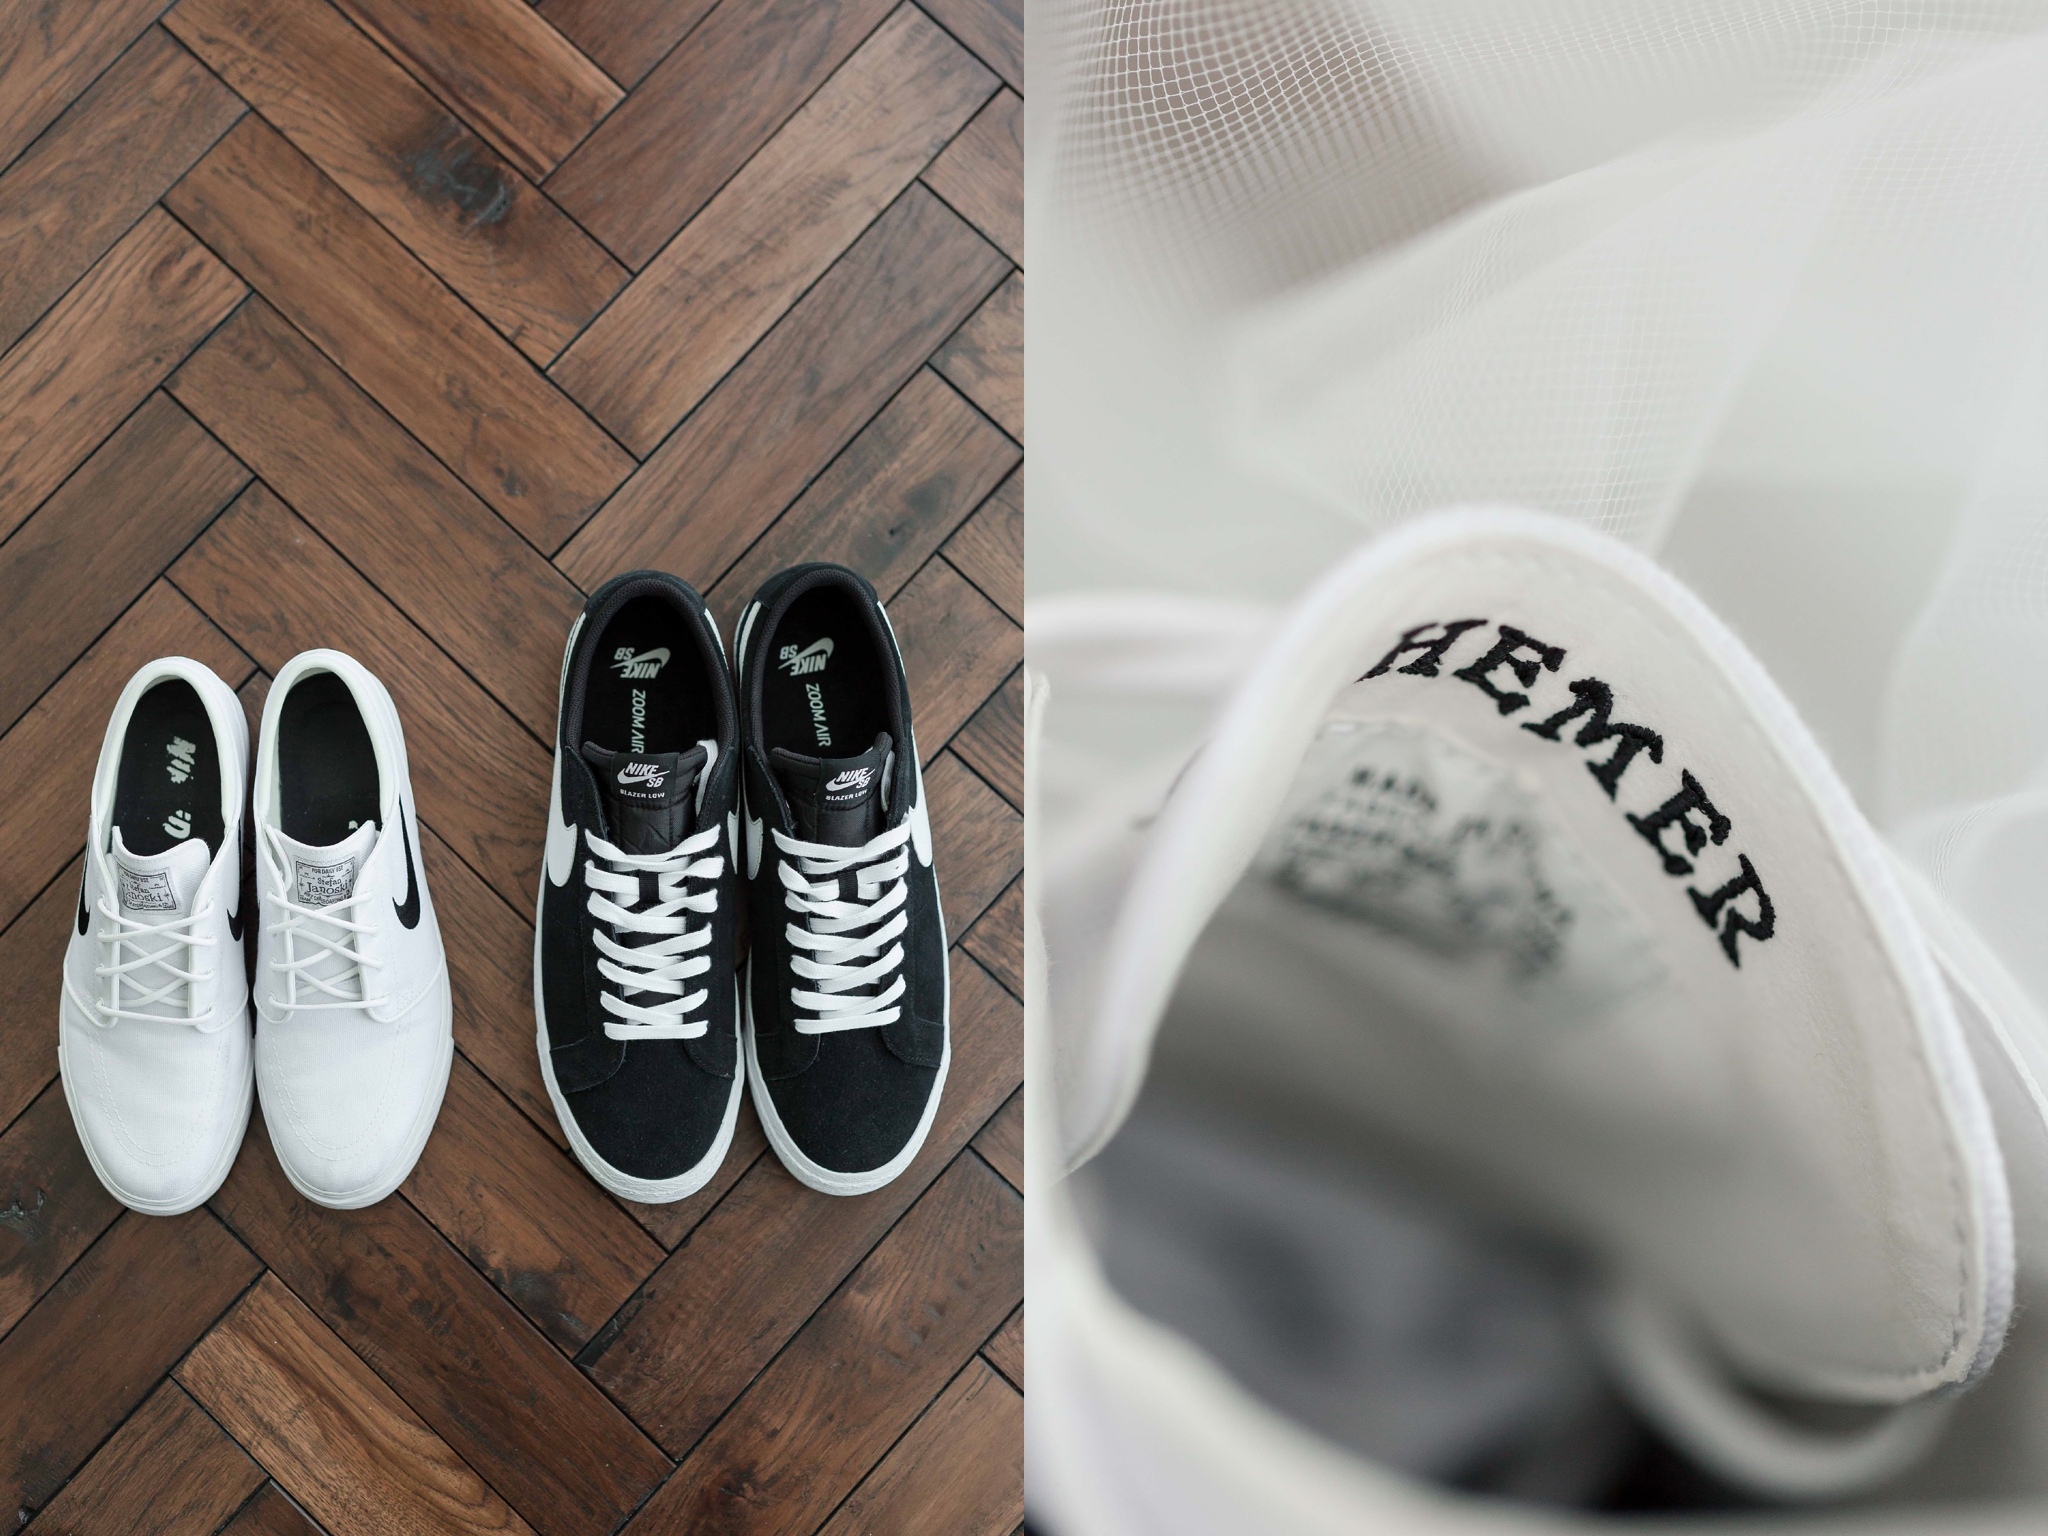 4-his-and-hers-nike-wedding-shoes - Maison Photography Blog